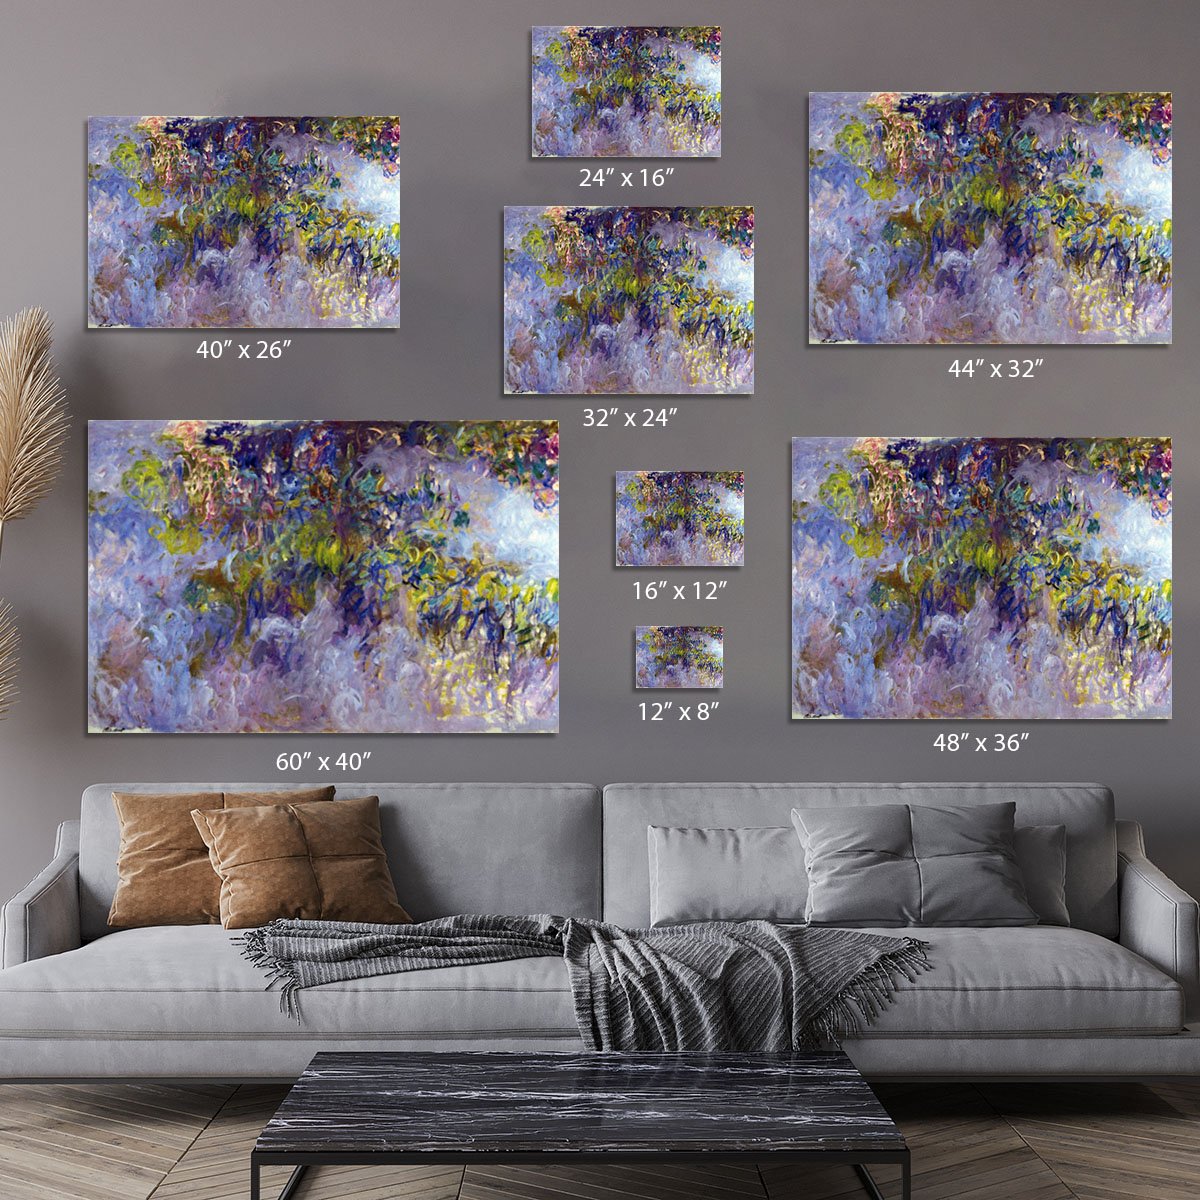 Wisteria 1 by Monet Canvas Print or Poster